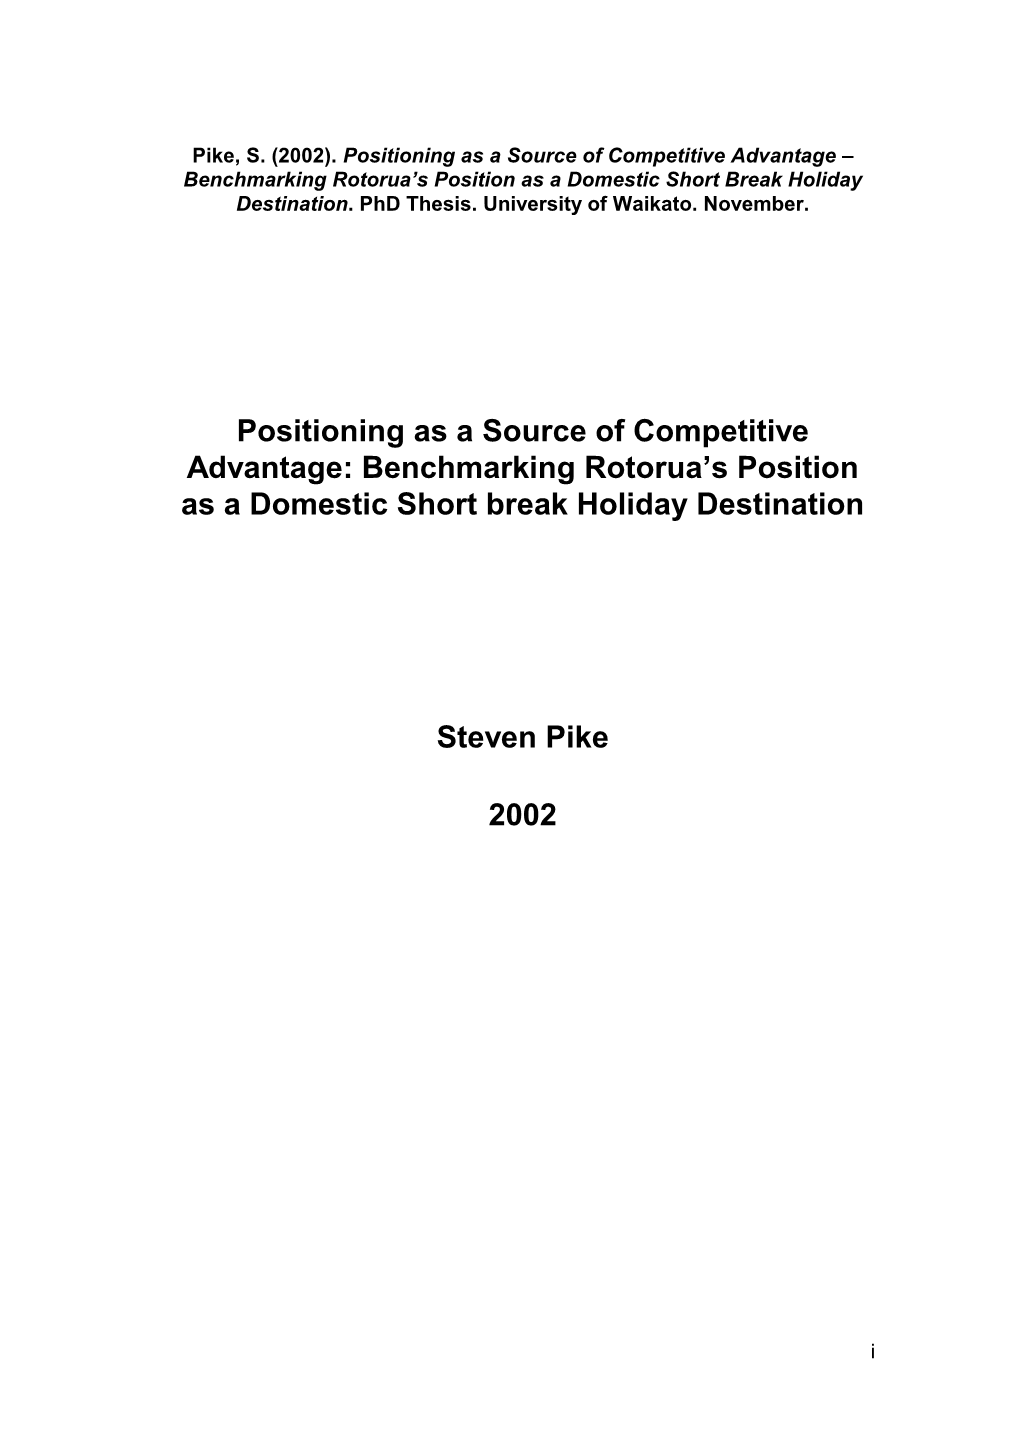 Steven Pike Thesis